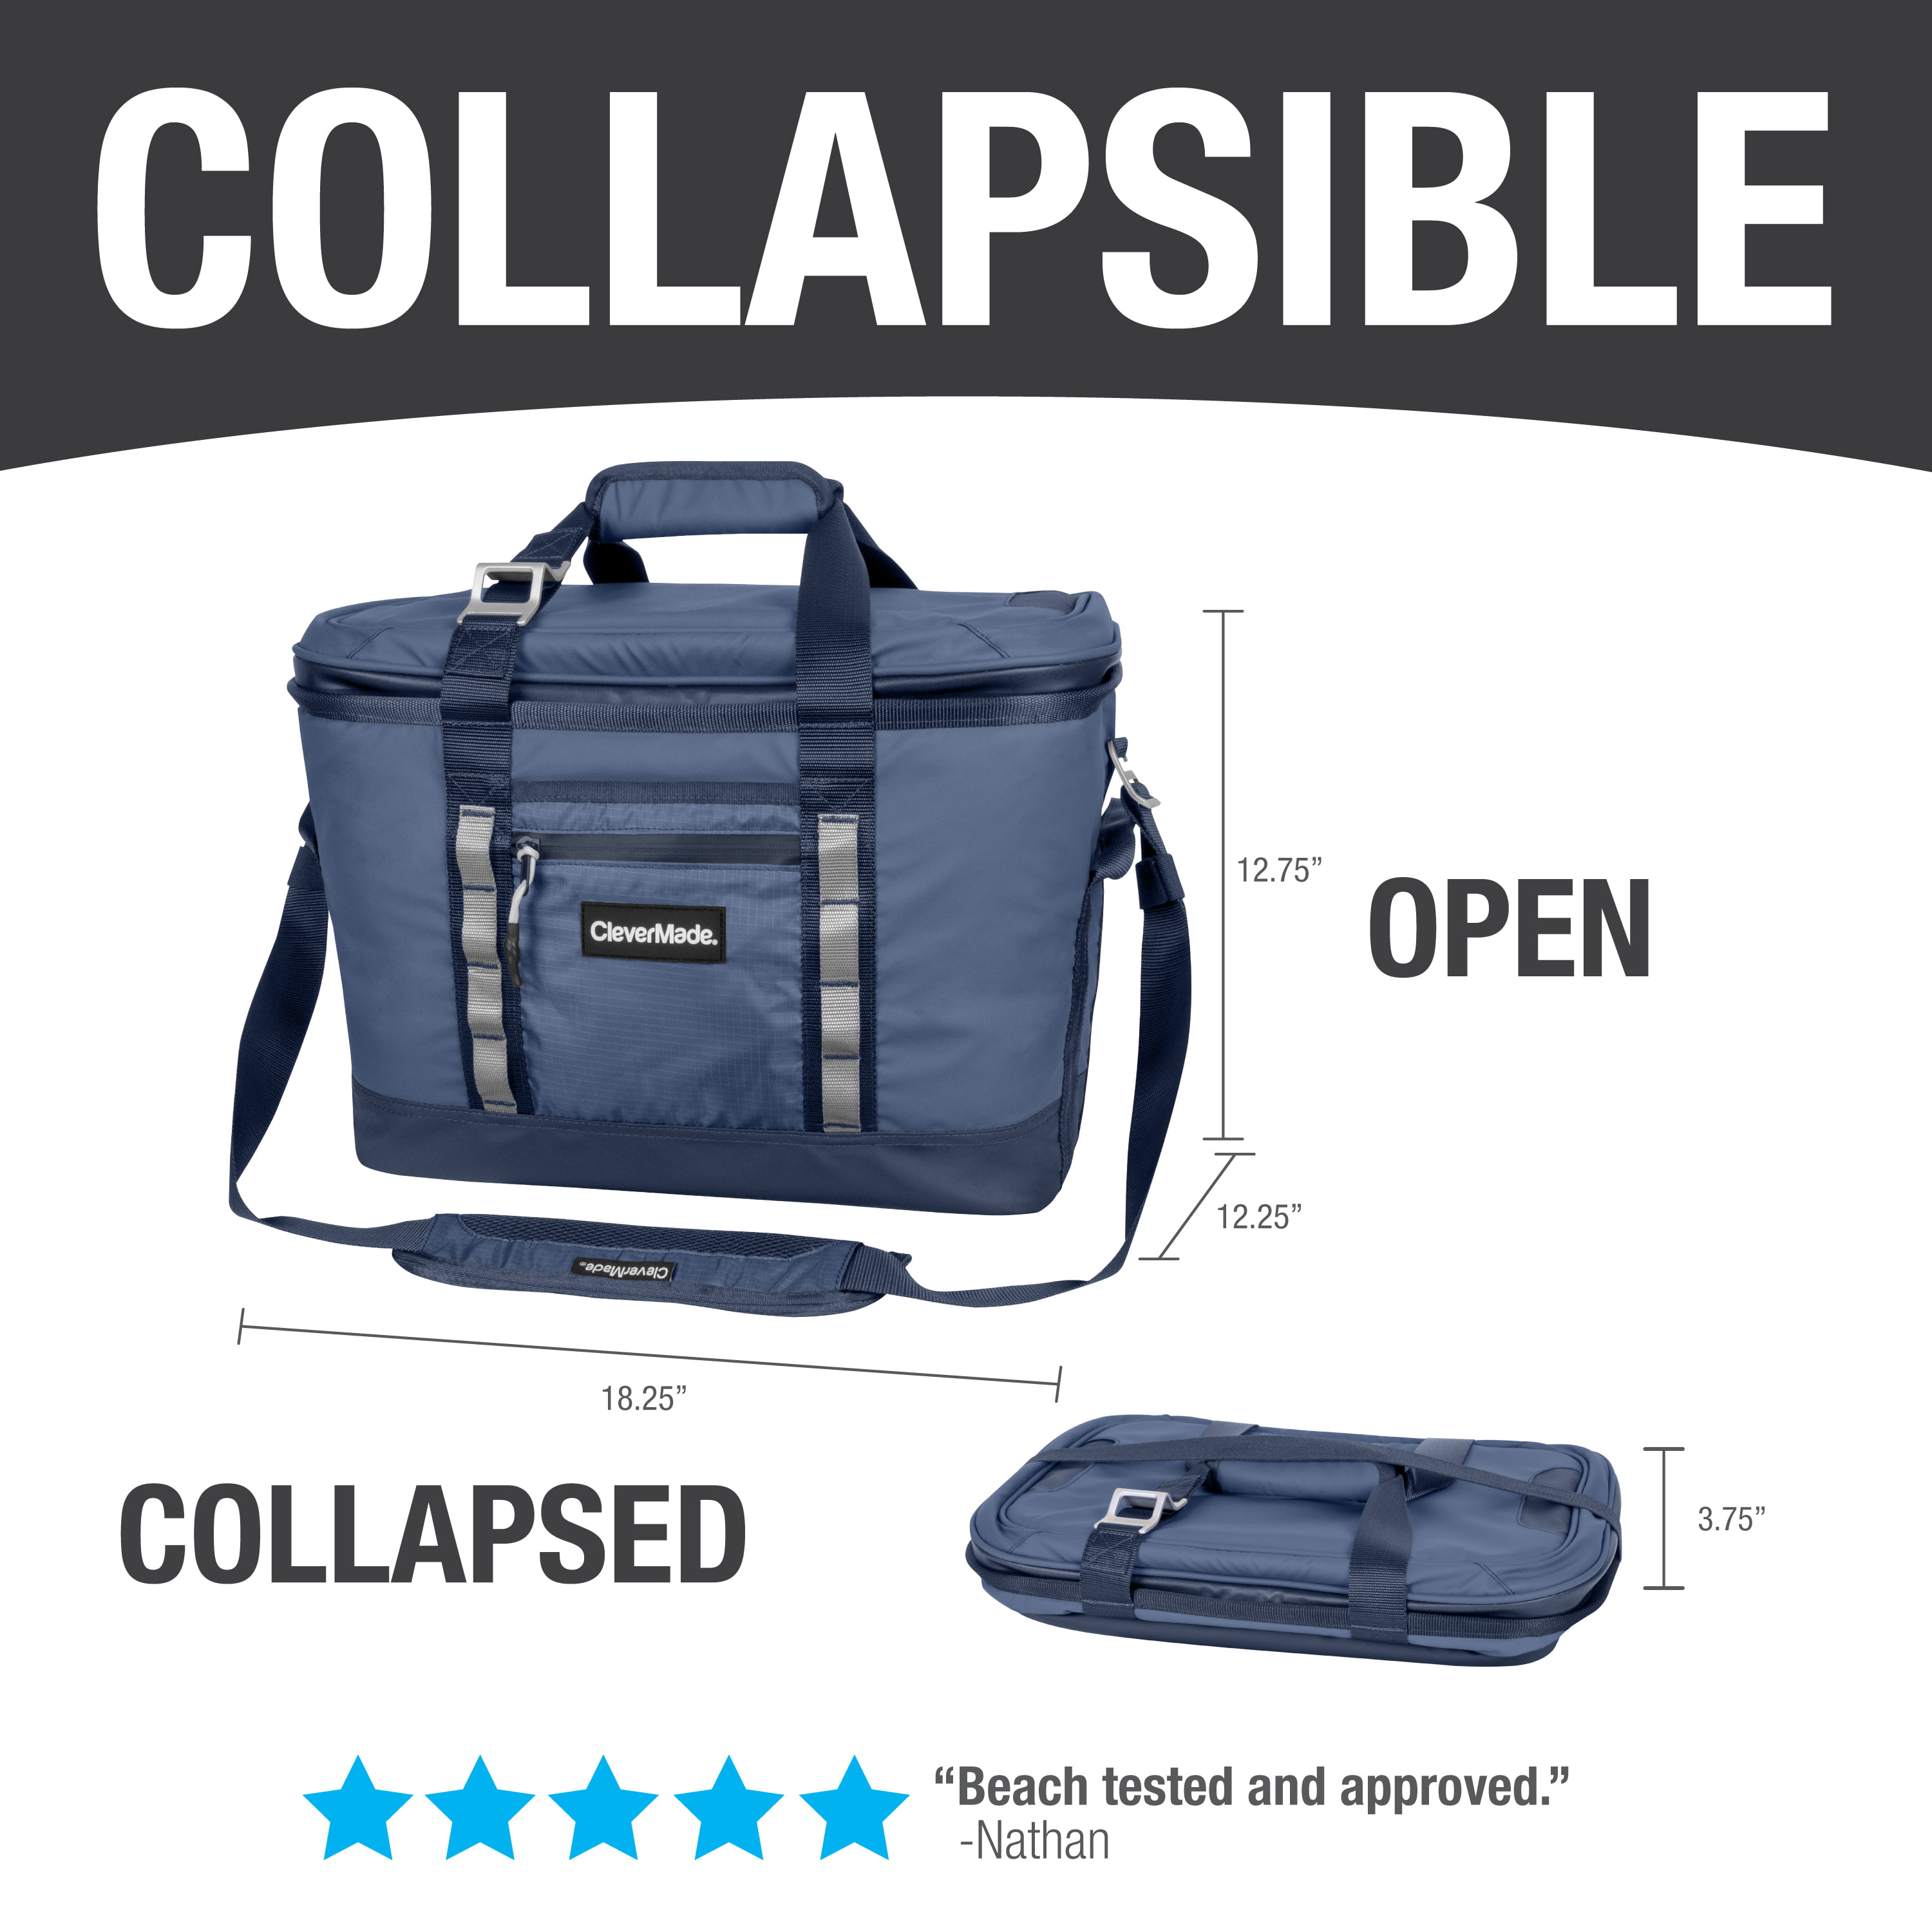 CleverMade Maverick Collapsible Cooler Bag - 50 Can Insulated 